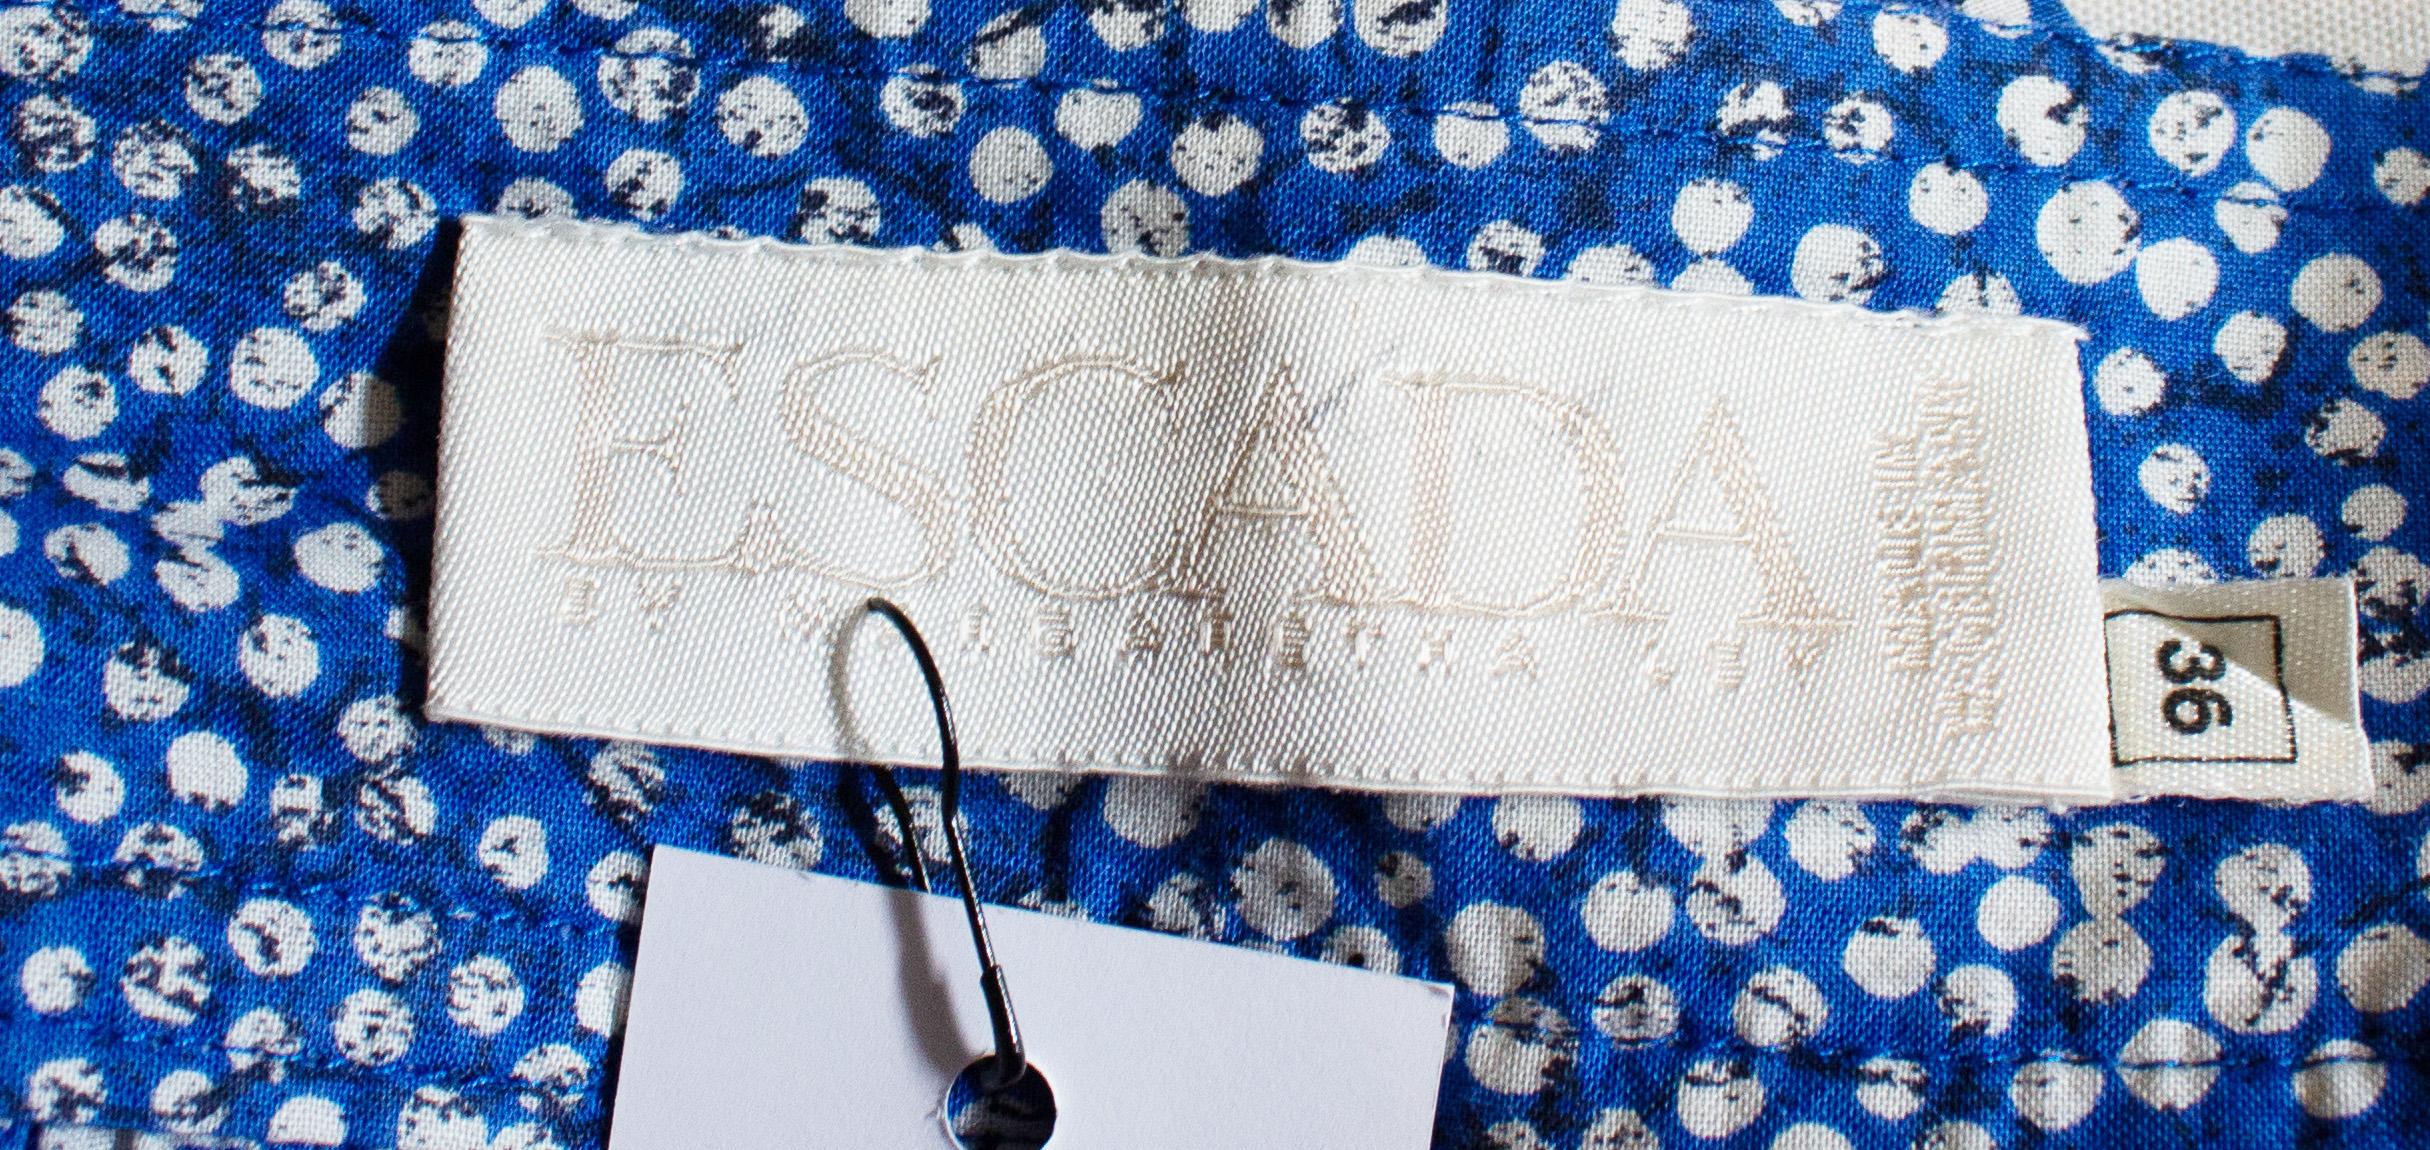 A fun vintage cotton skirt by Escada.  The skirt is in a blue and white cotton in an wonderful print, and has an interesting button opening at the front and back. There are two pockets, and the skirt is unlined. Measurements;  Waist 27''. length 35''